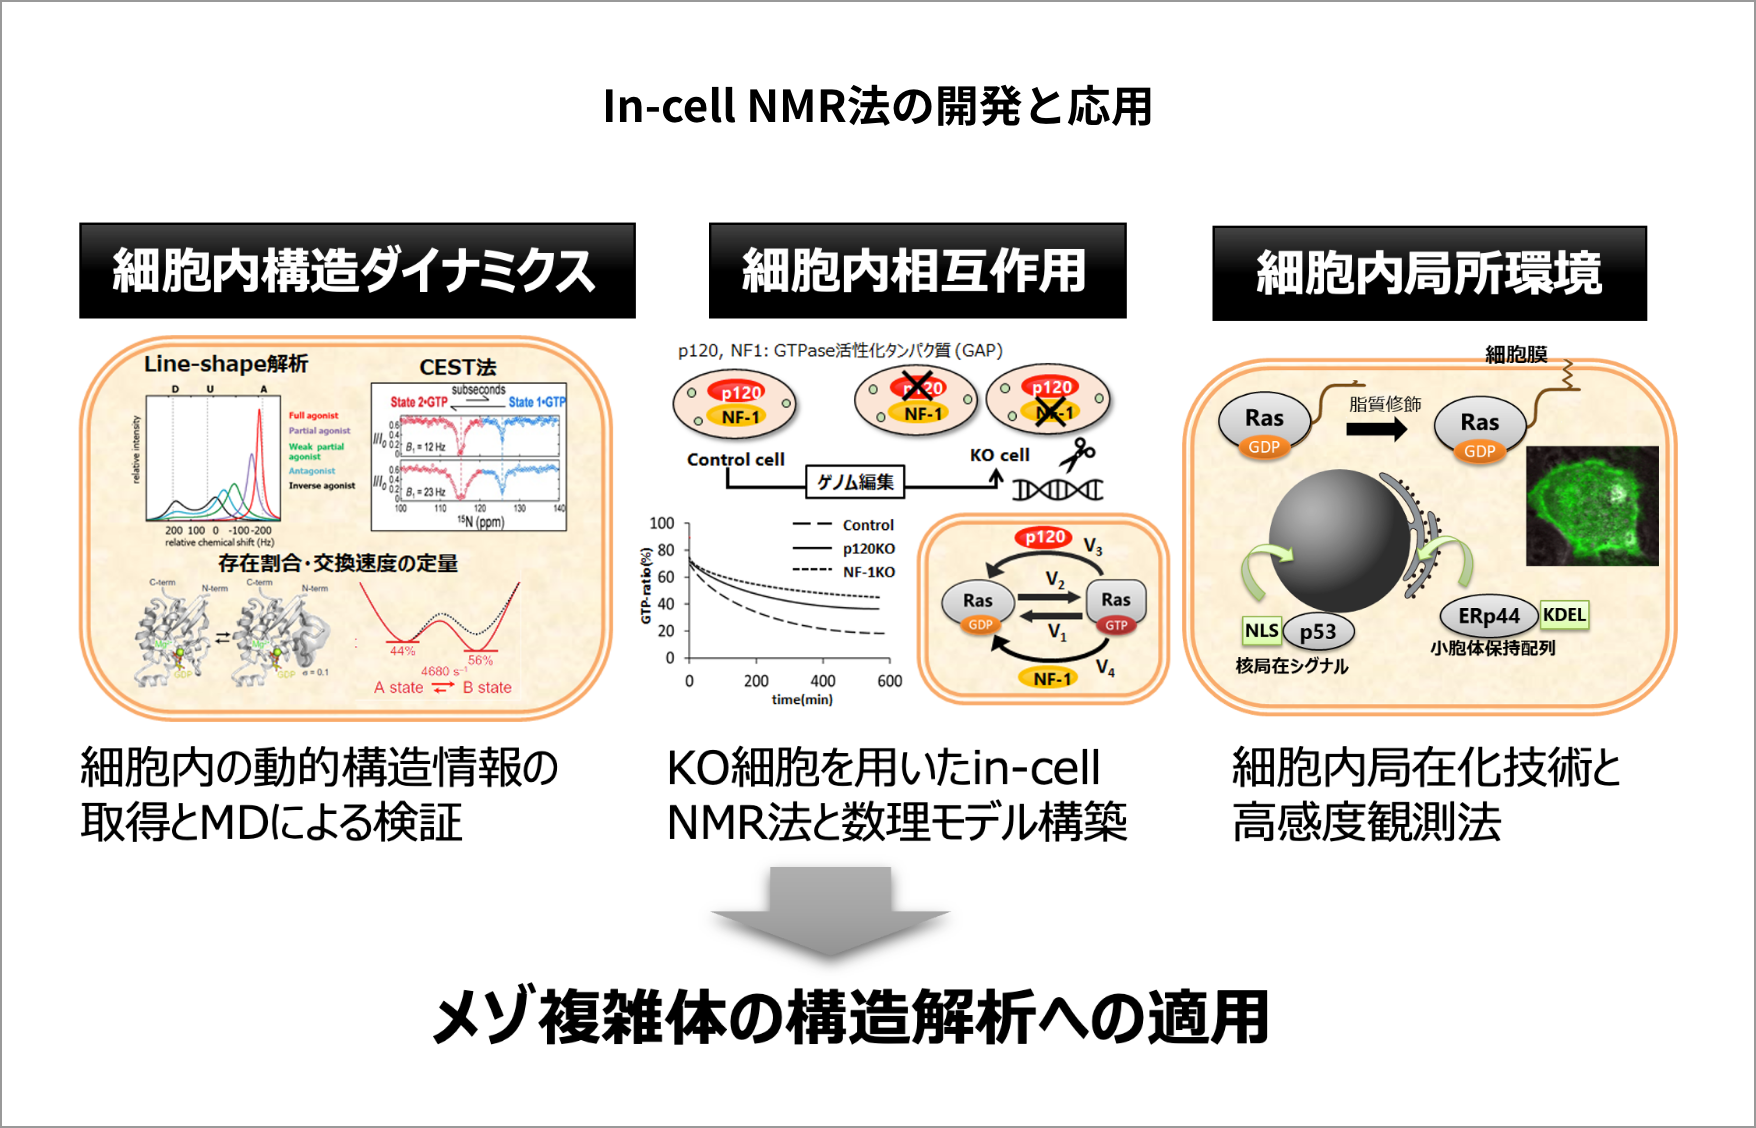 In-cell NMR法の開発と応用の図